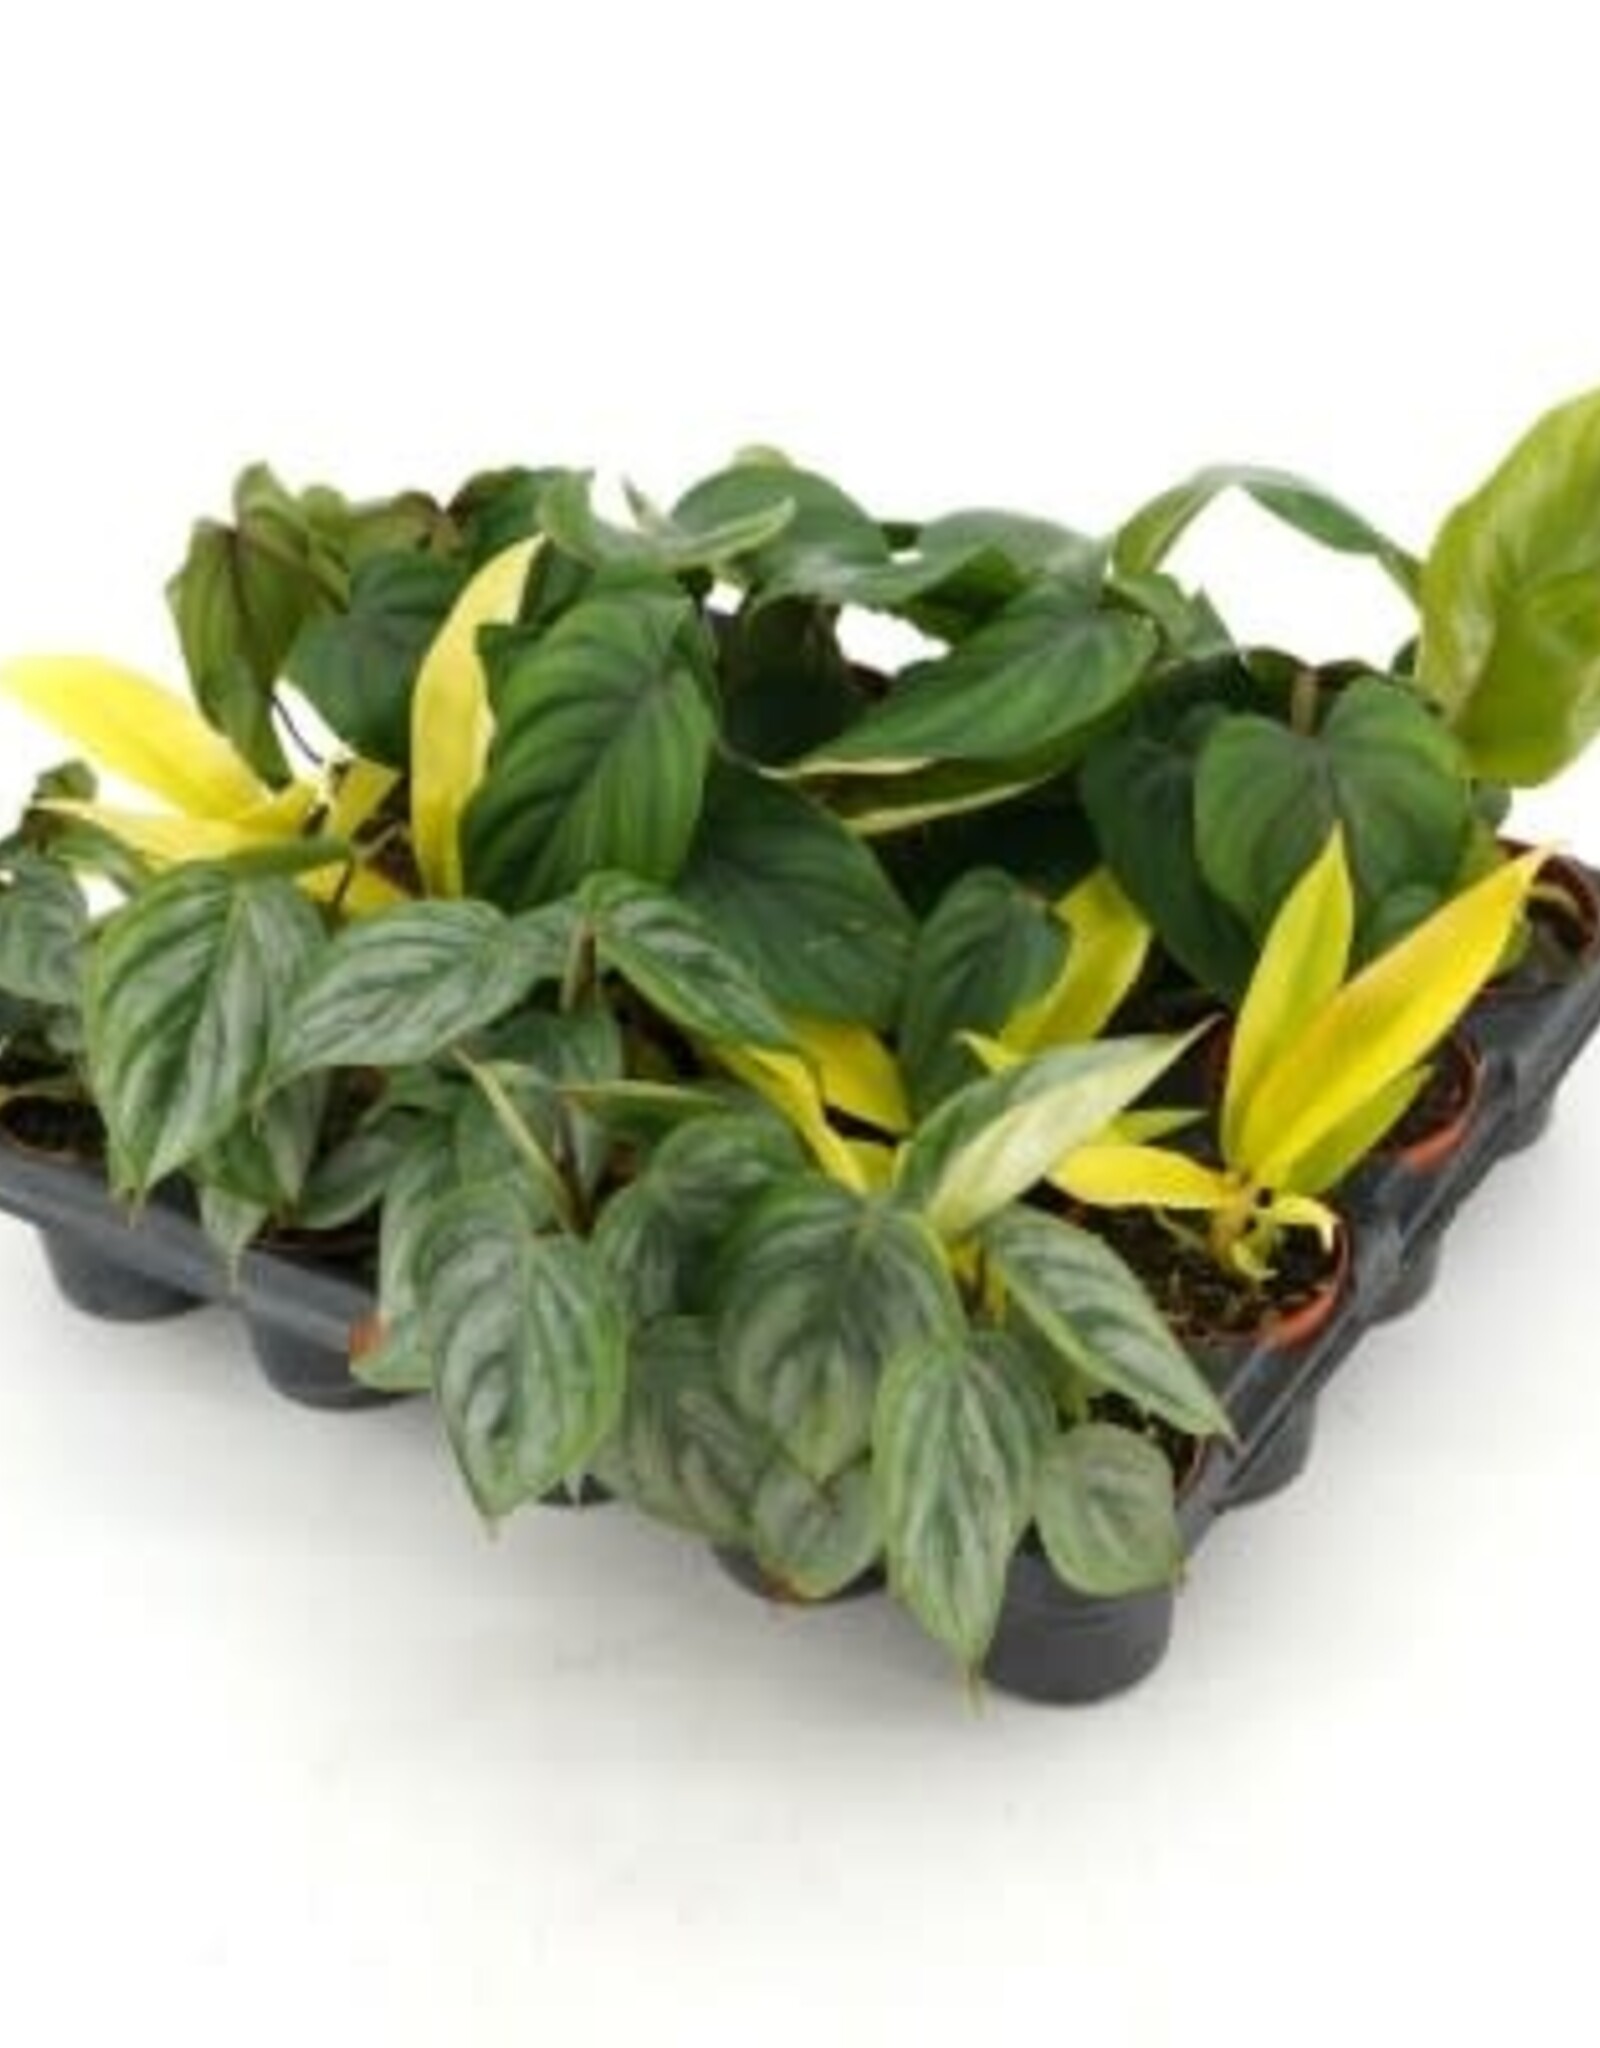 Cascade Tropicals Philodendron assorted -  2in